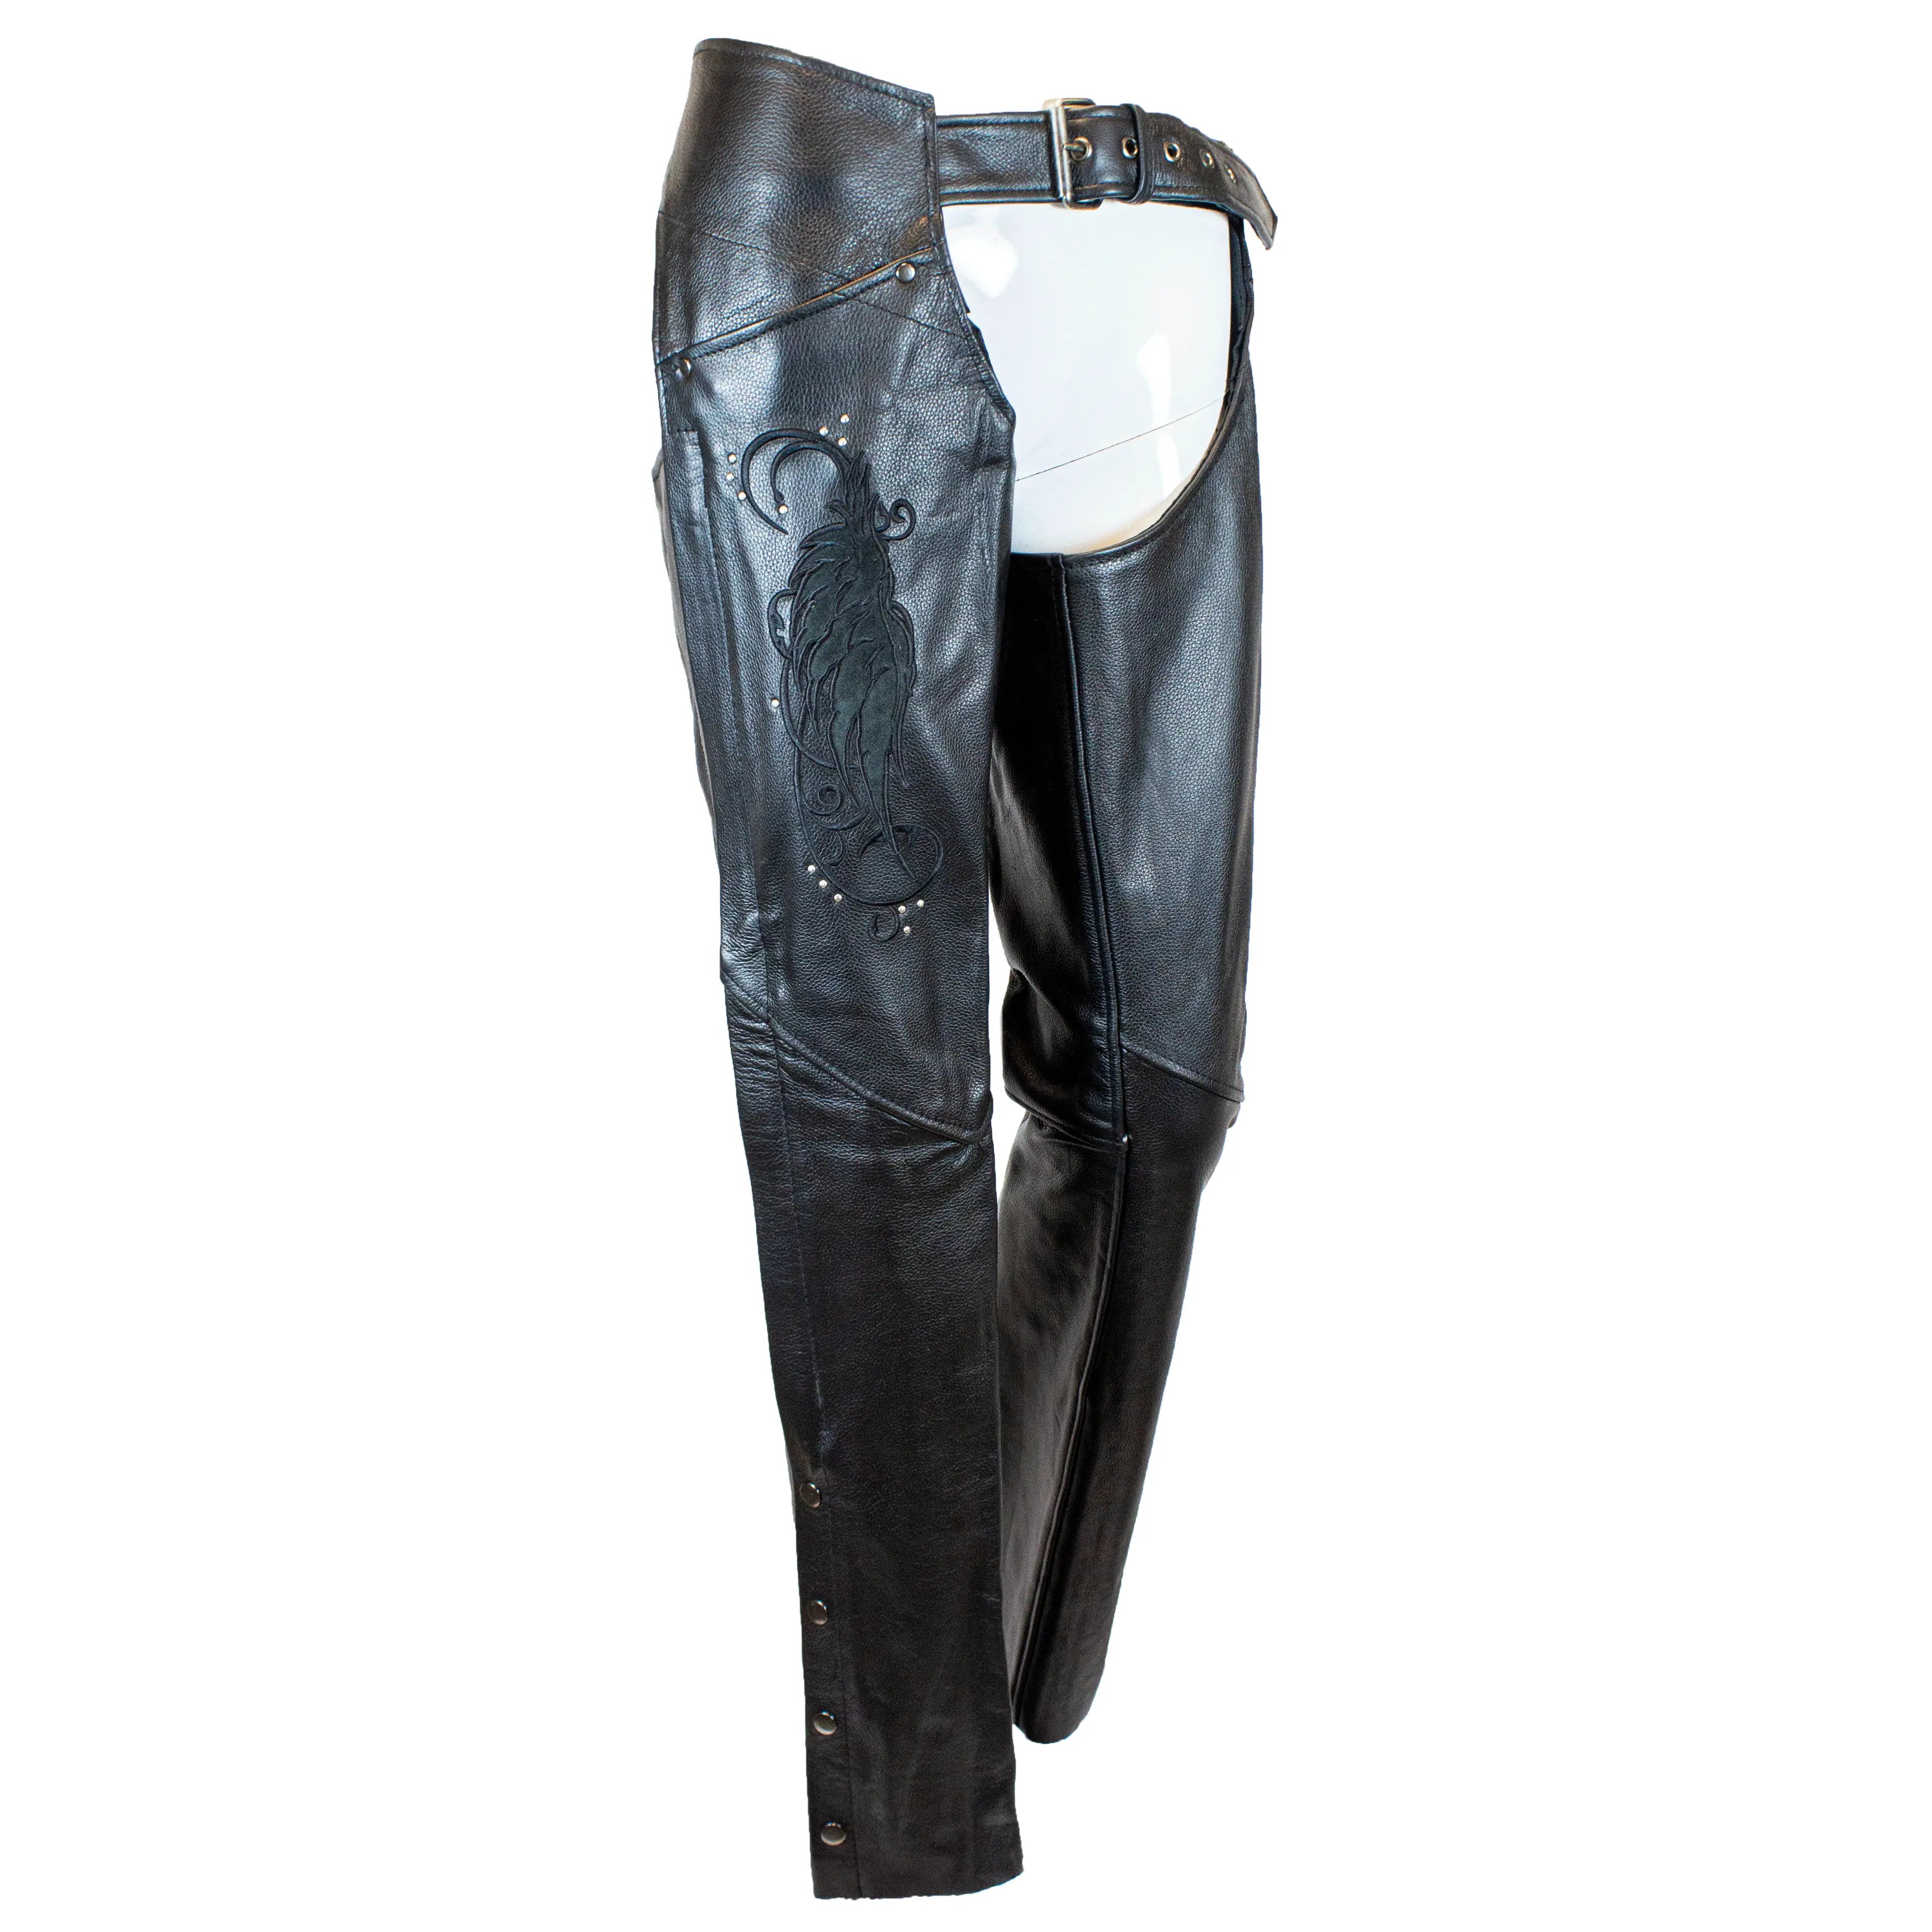 BOL/Open Road Women's Suede Wing Design Leather Chaps Women's Motorcycle Pants & Chaps Boutique of Leathers/Open Road